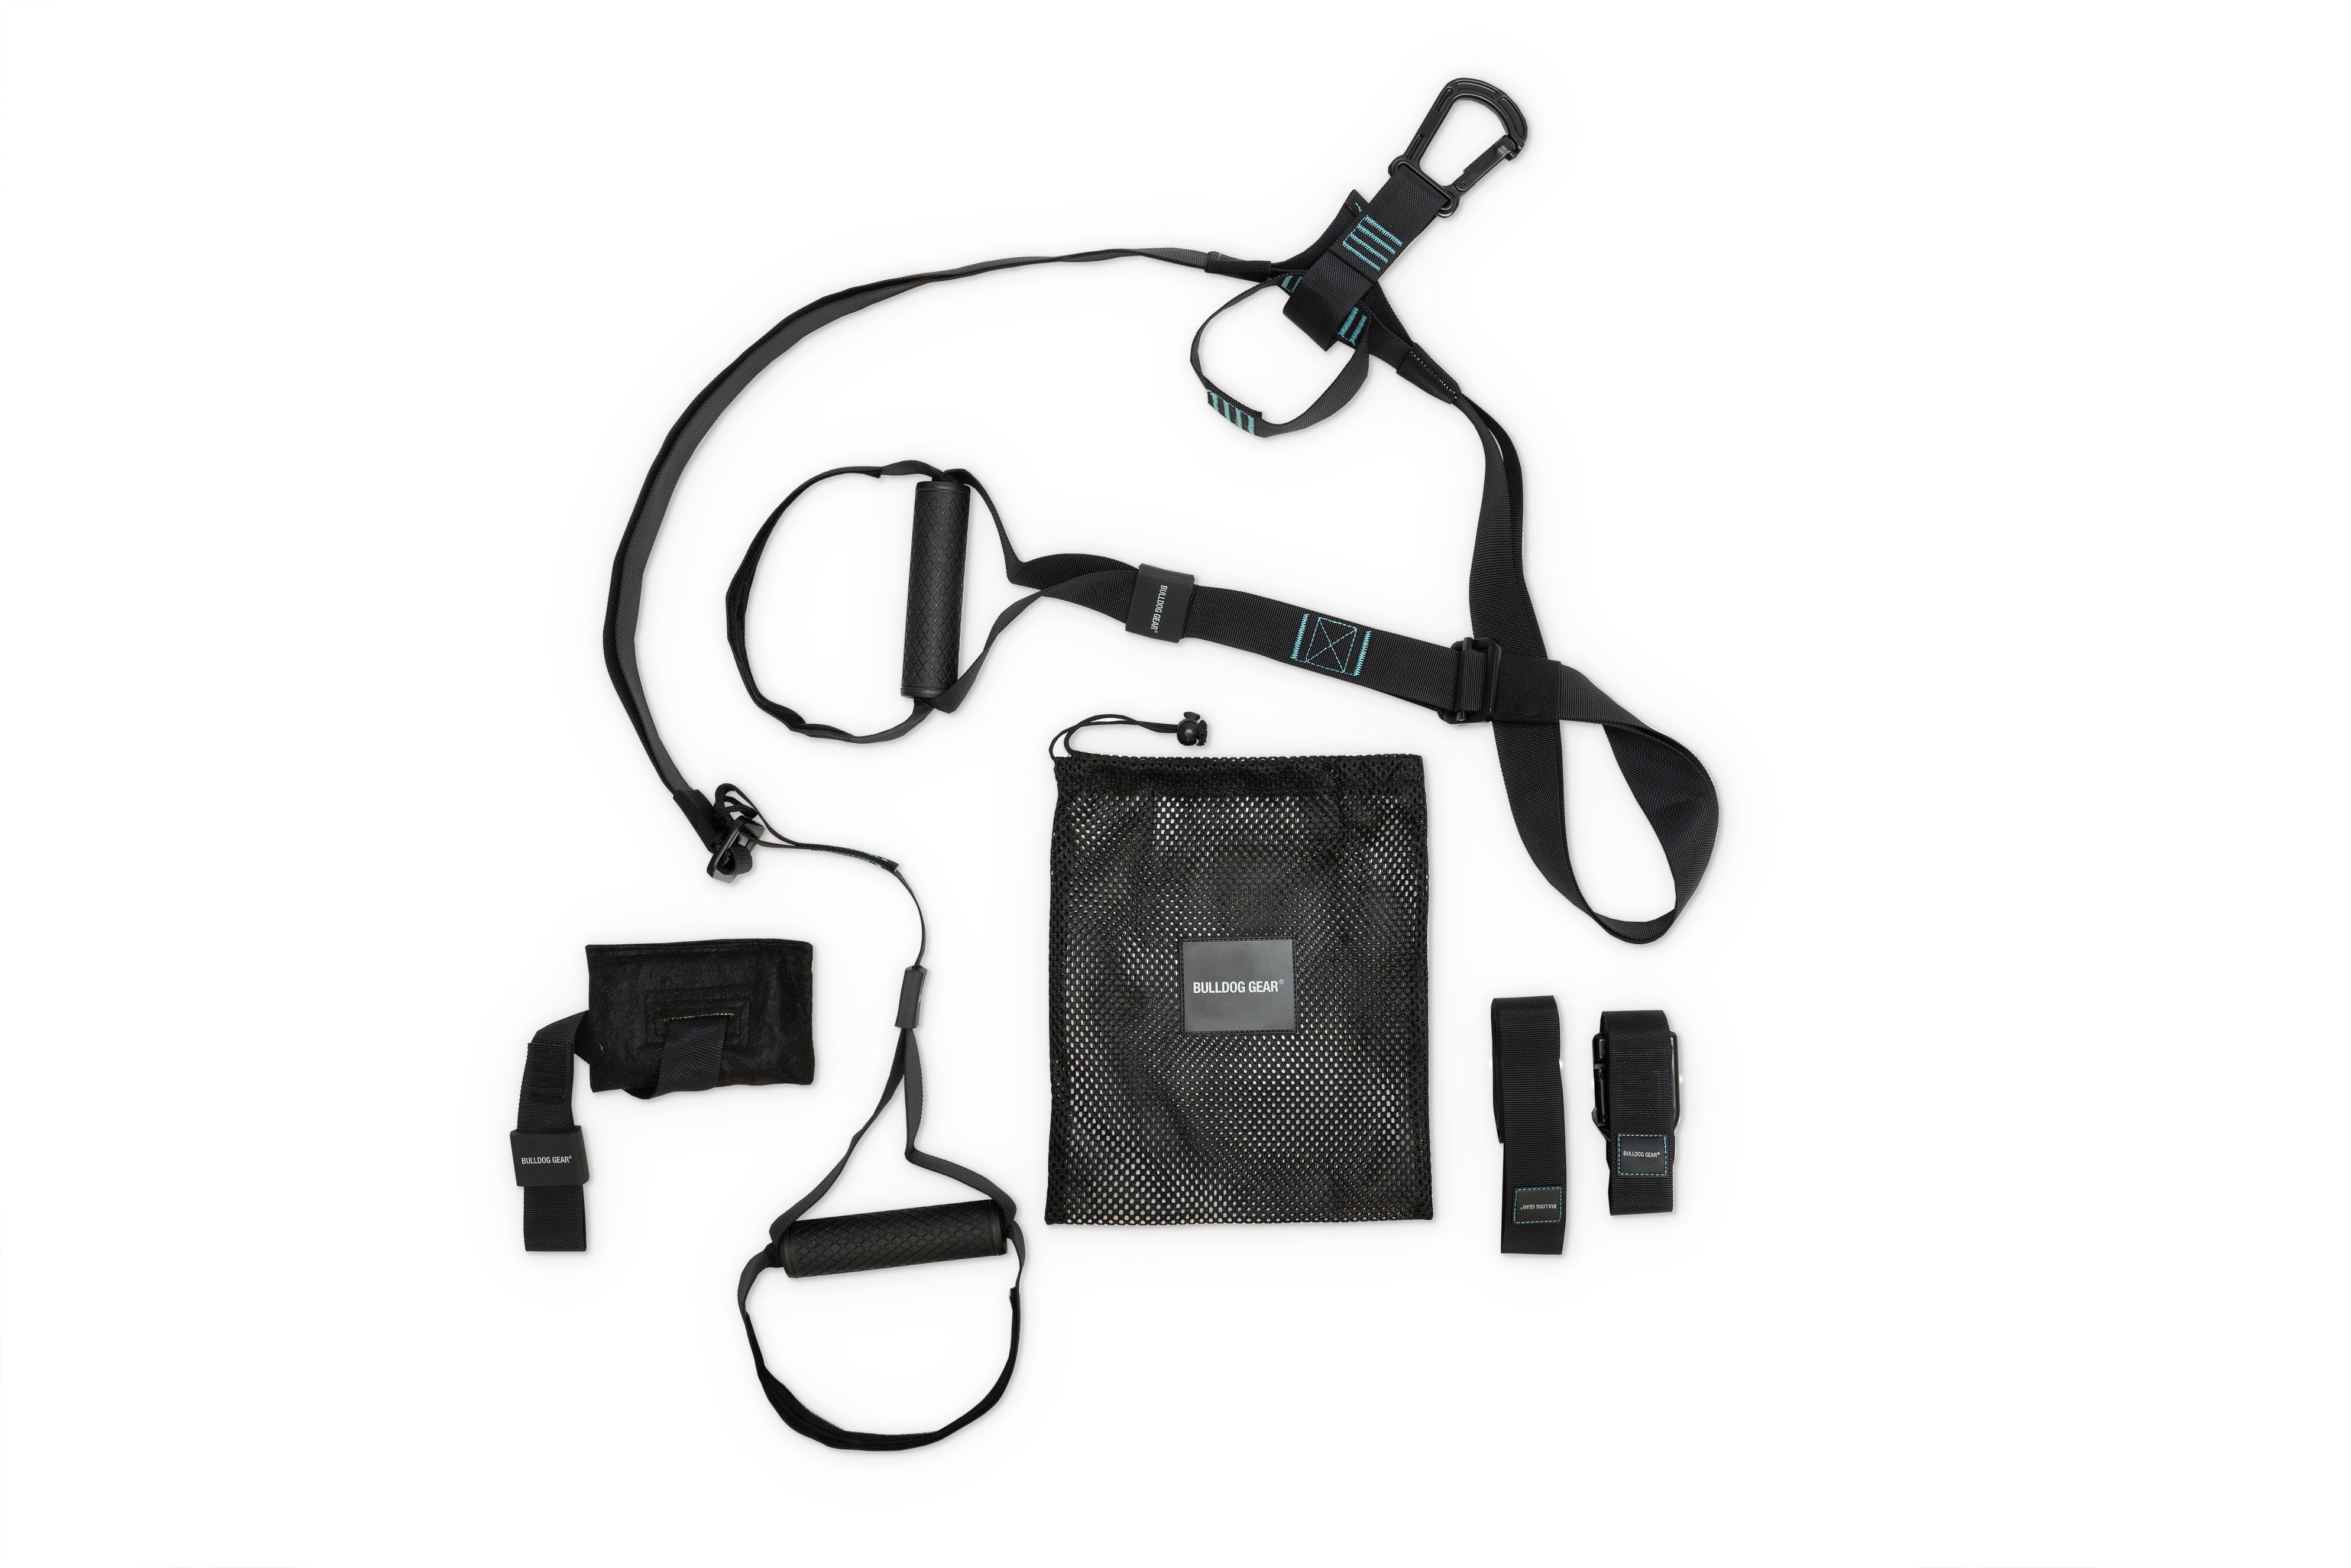 Bulldog Gear Suspension Trainer with carry bag